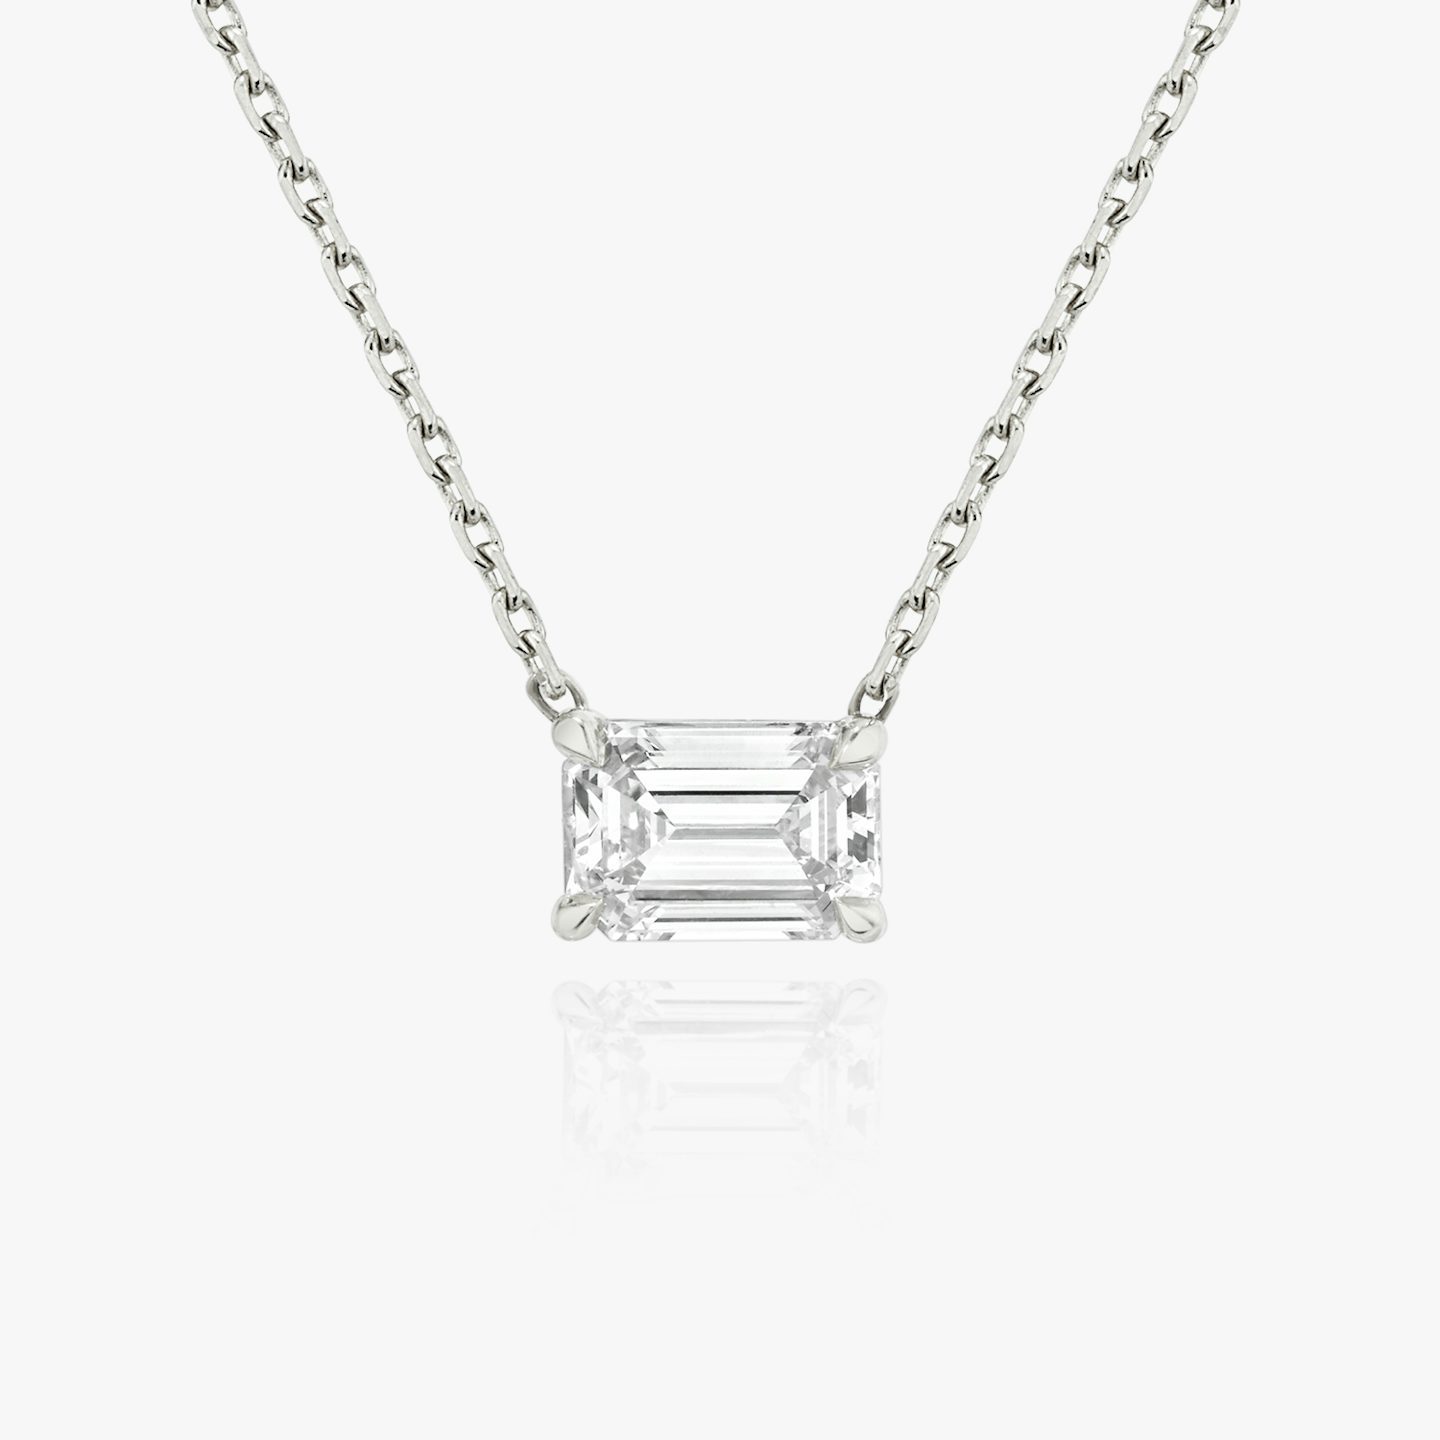 VRAI Solitaire Necklace | Emerald | 14k | 18k White Gold | Carat weight: 1/4